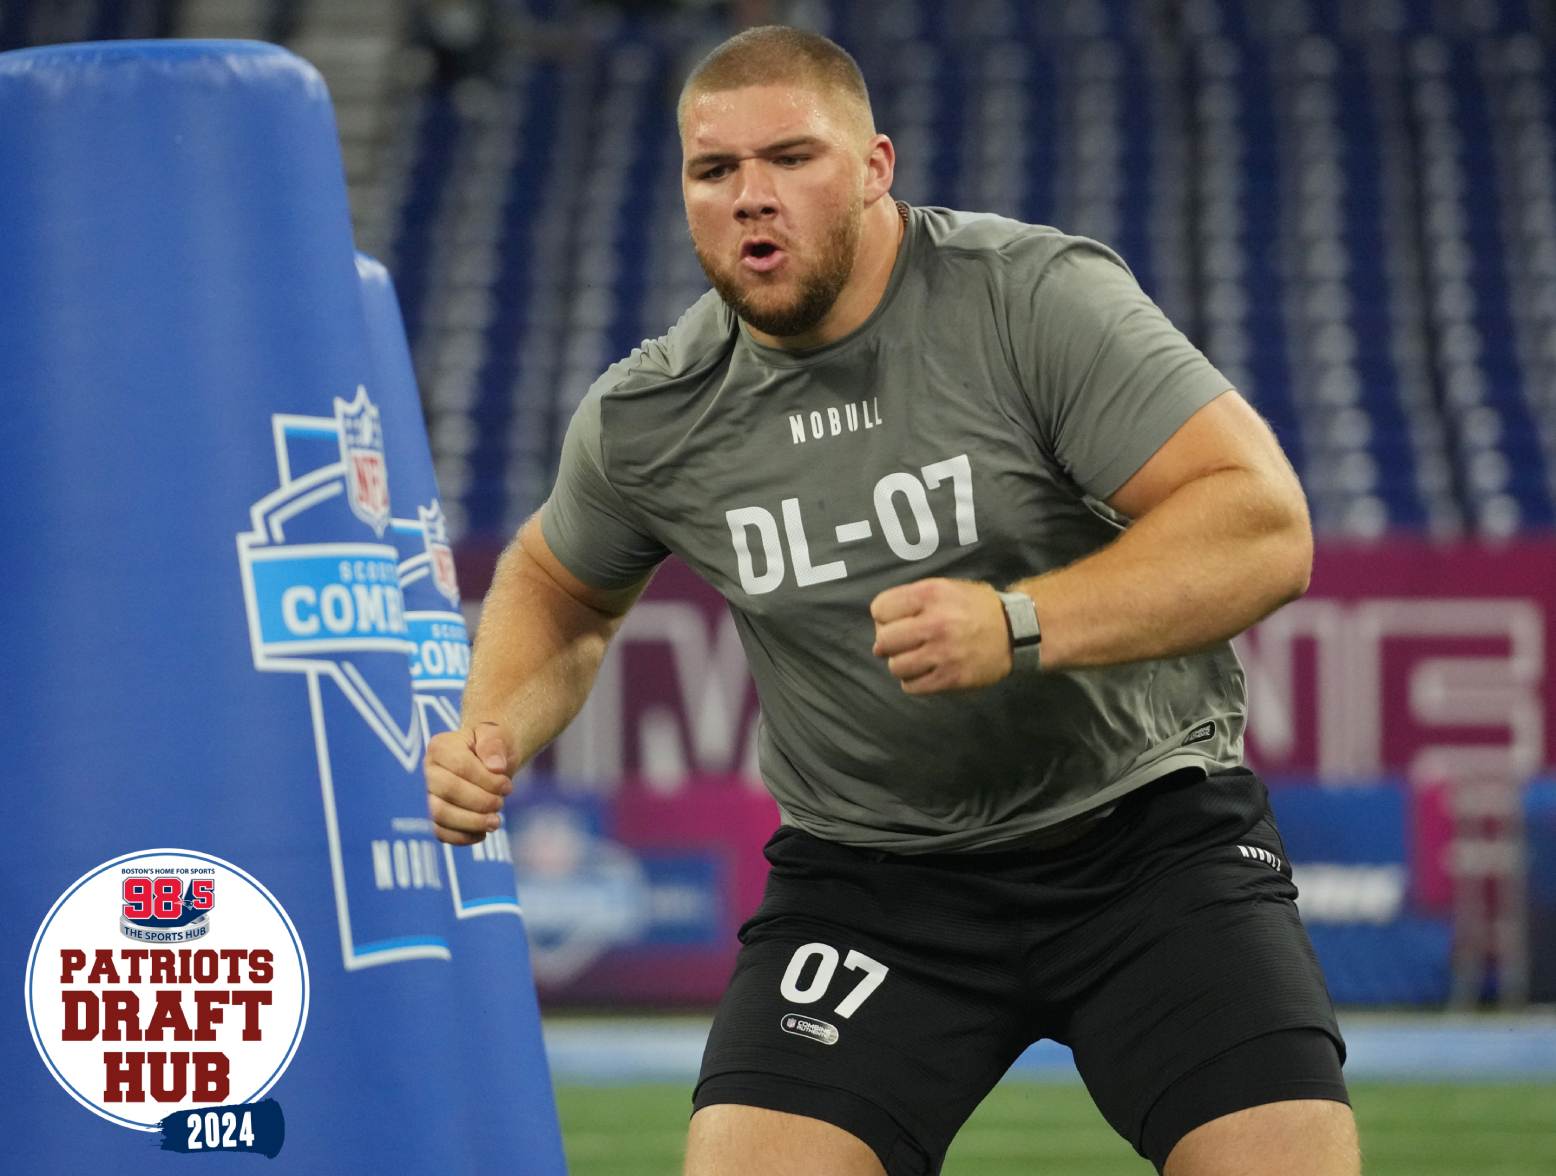 Feb 29, 2024; Indianapolis, IN, USA; Florida State defensive lineman Braden Fiske (DL07) works out during the 2024 NFL Combine at Lucas Oil Stadium. Credit: Kirby Lee-USA TODAY Sports